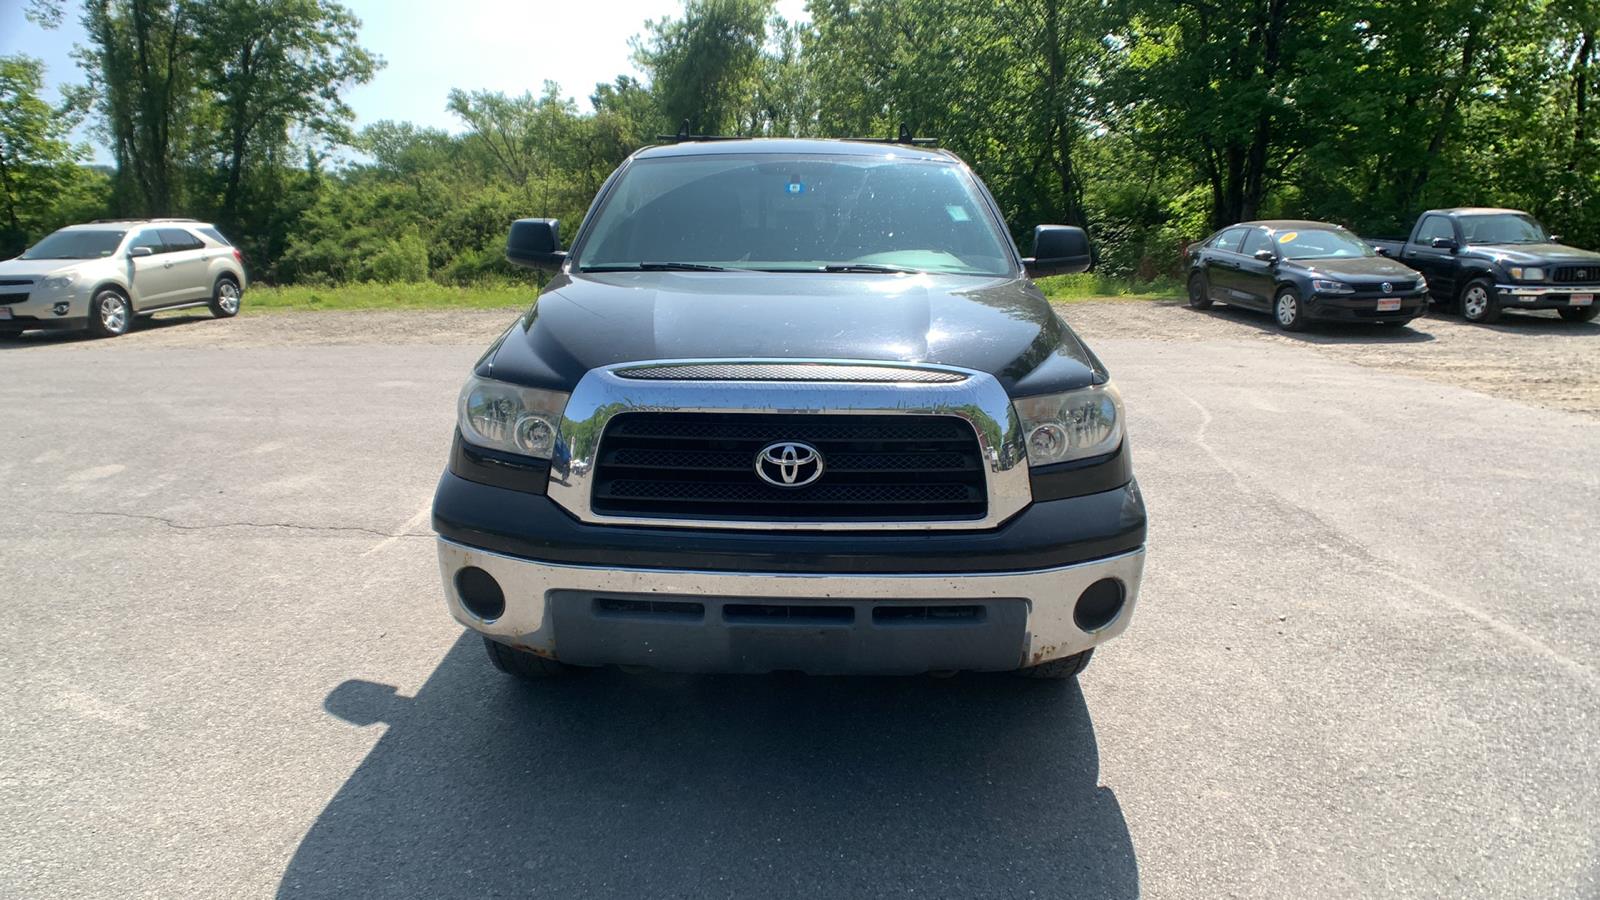 Used 2008 Toyota Tundra SR5 with VIN 5TBBV54158S516804 for sale in Westminster, VT